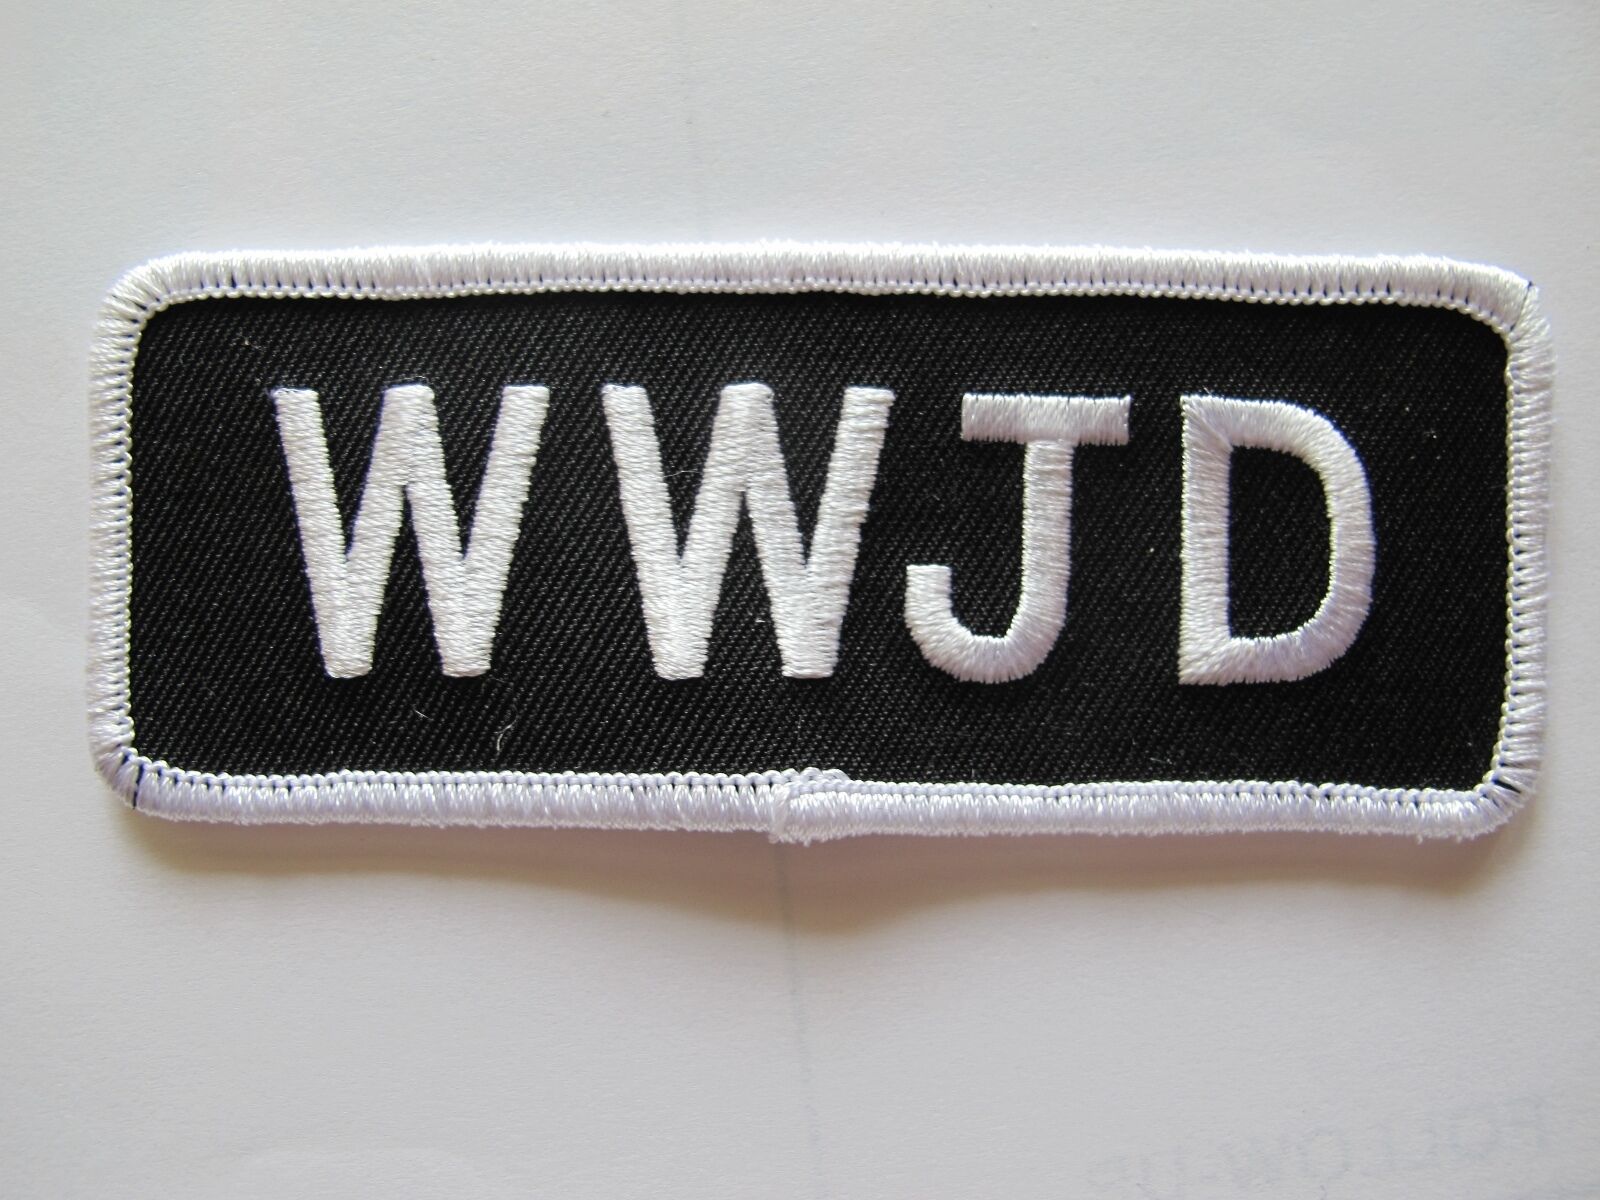 #5028 WWJD What Would Jesus Christian Motorcycle Embroidered Biker Patch